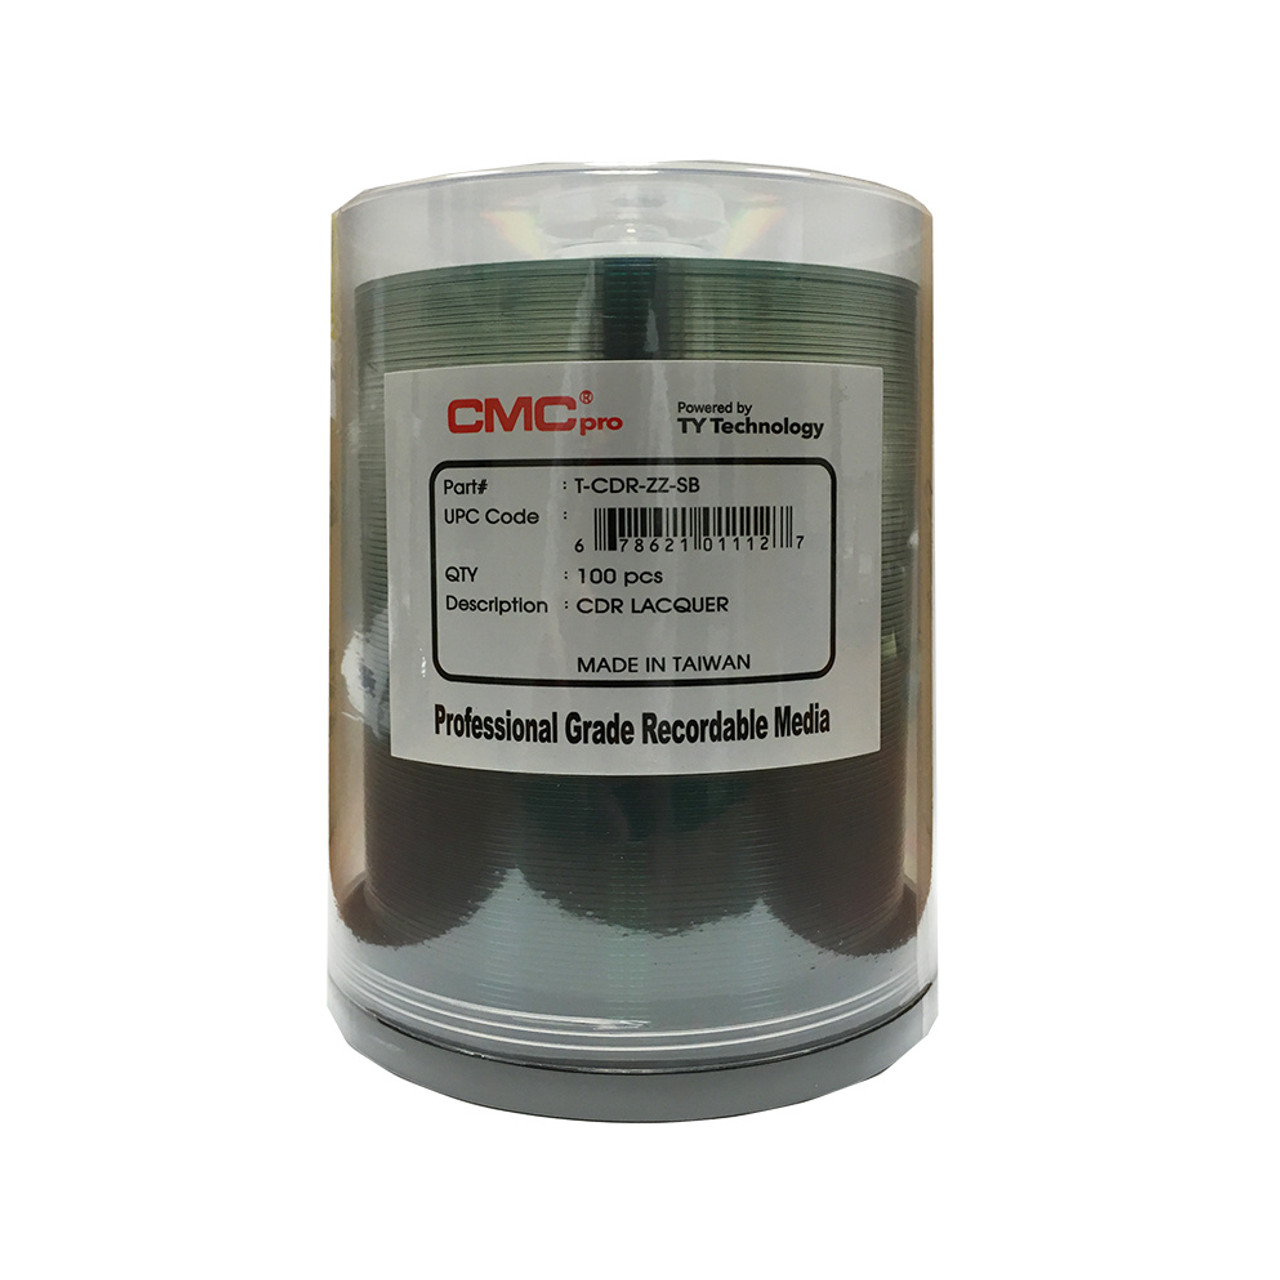 CMC Pro T-CDR-ZZ-SB CD-R Disc 80min/700MB/52x Silver Lacquer Surface - 600  Count Box - (6)100 Disc Spindles